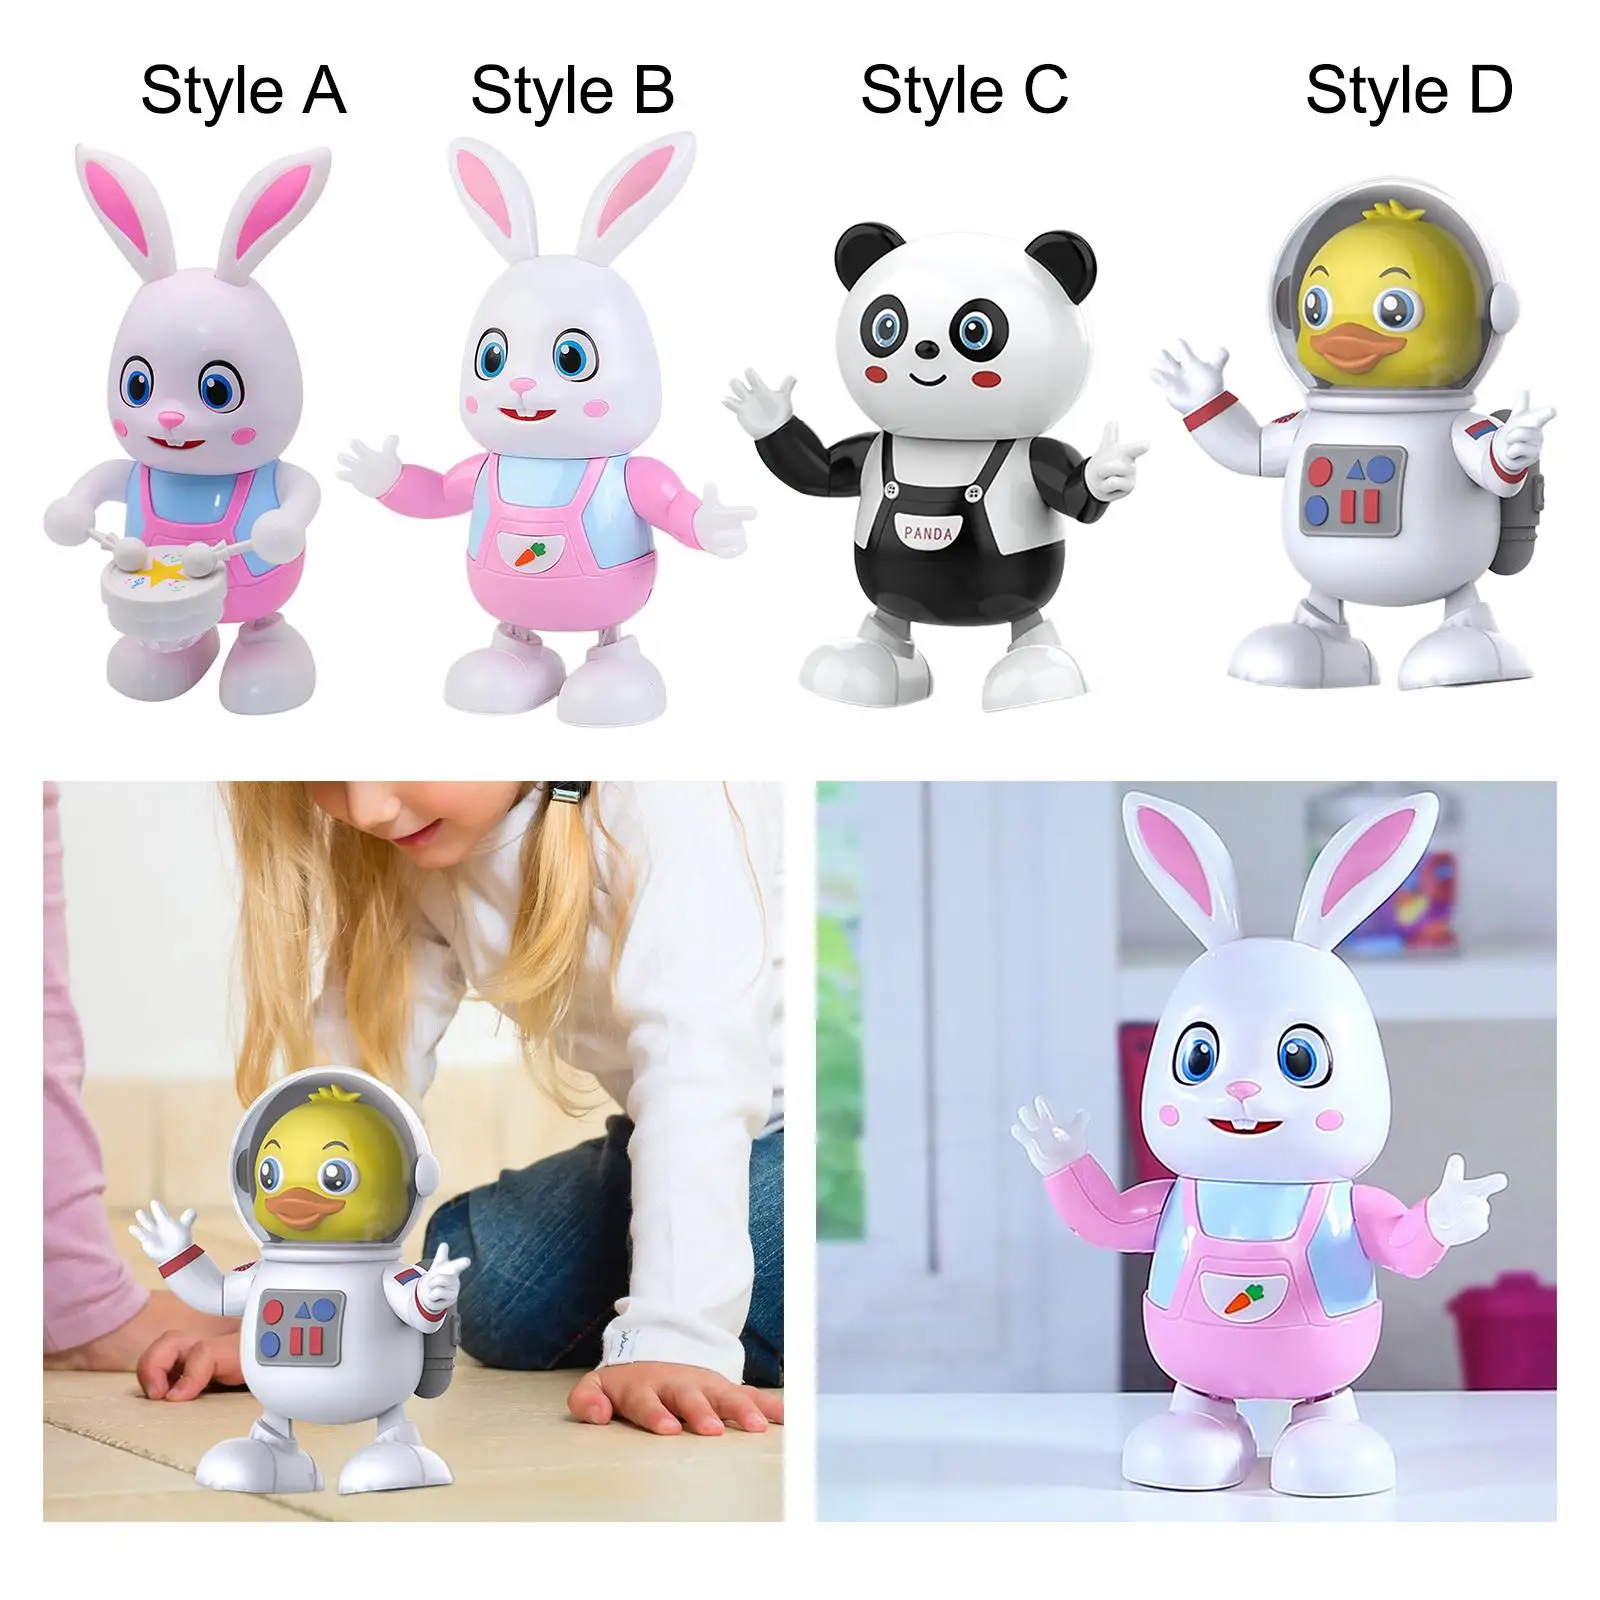 Baby Dancing Toy Easy to Use Learning Decoration Cute Music and Lights Toy for Girls Toddlers Children Babies 3+ Year Old